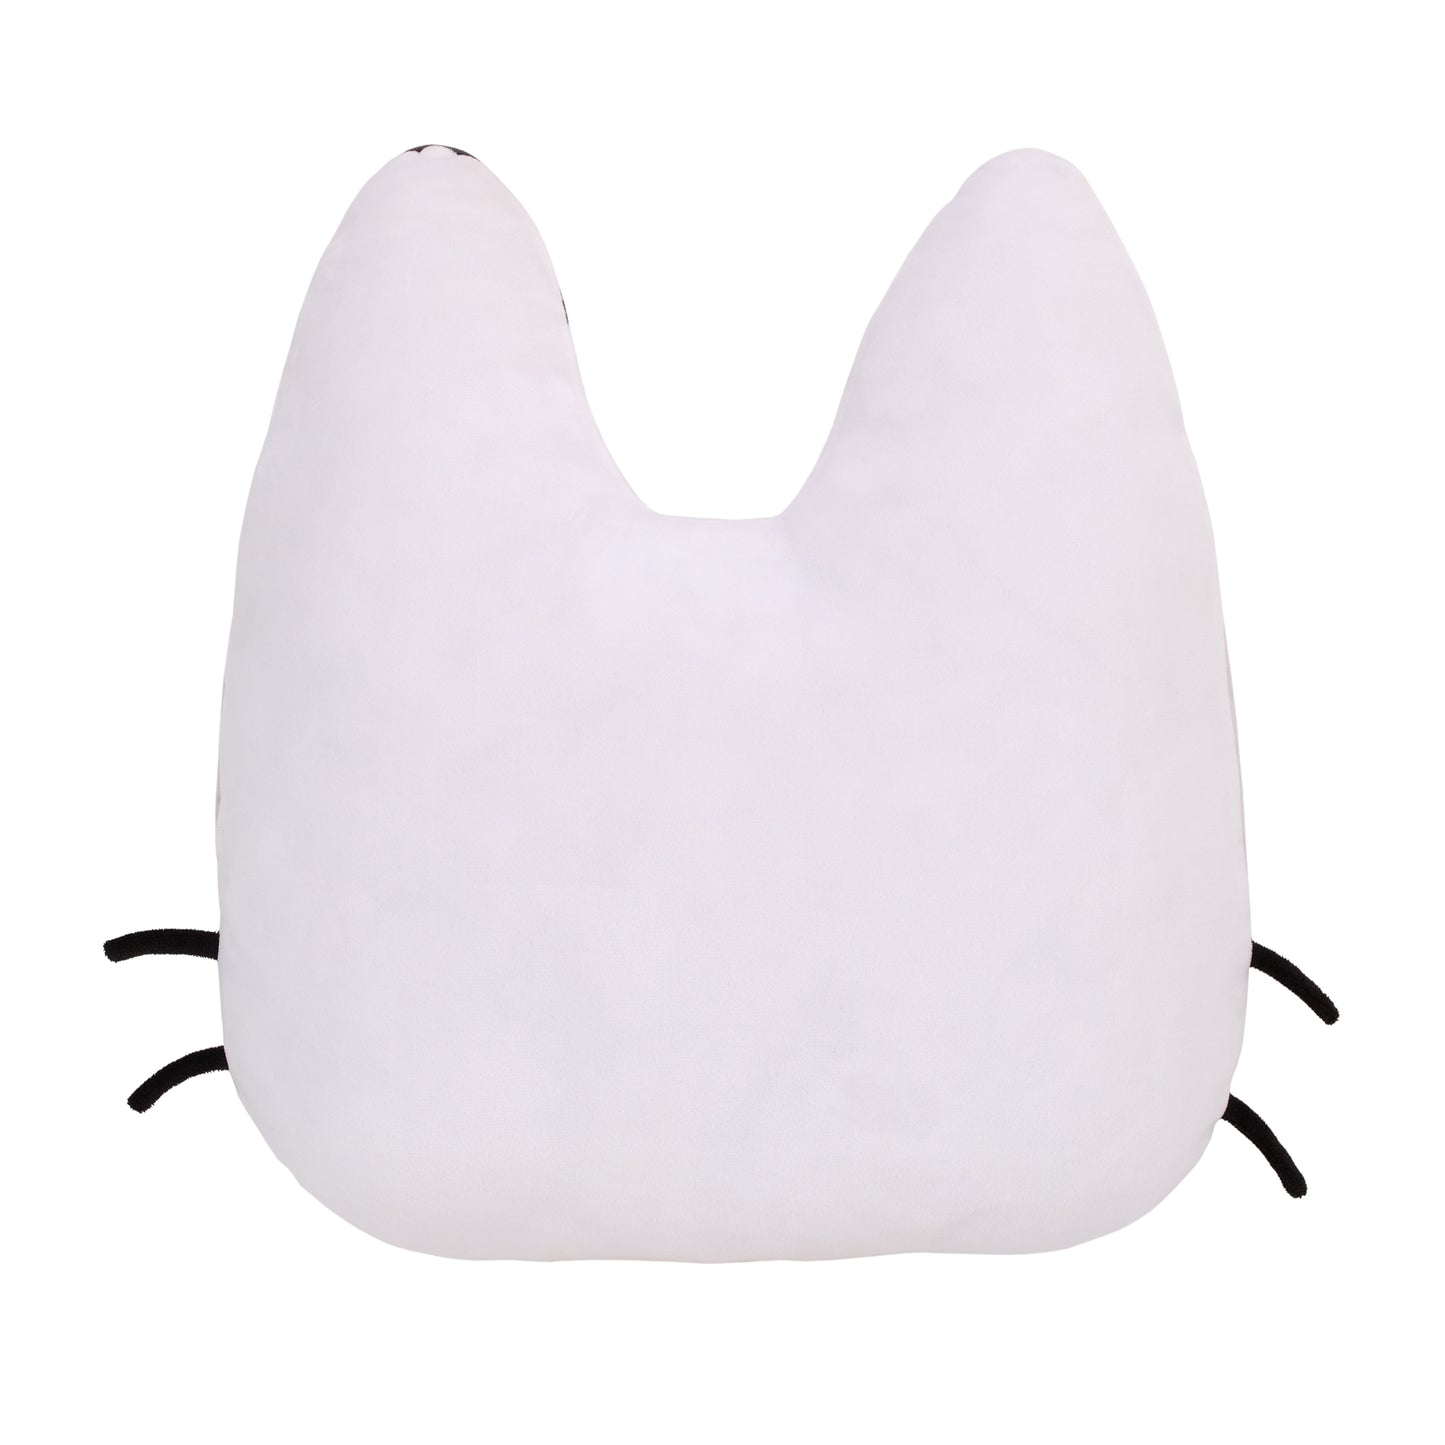 DreamWorks Gabby's Dollhouse Dream It Up White, Pink and Black Pandy Paws Shaped Squishy Toddler Pillow